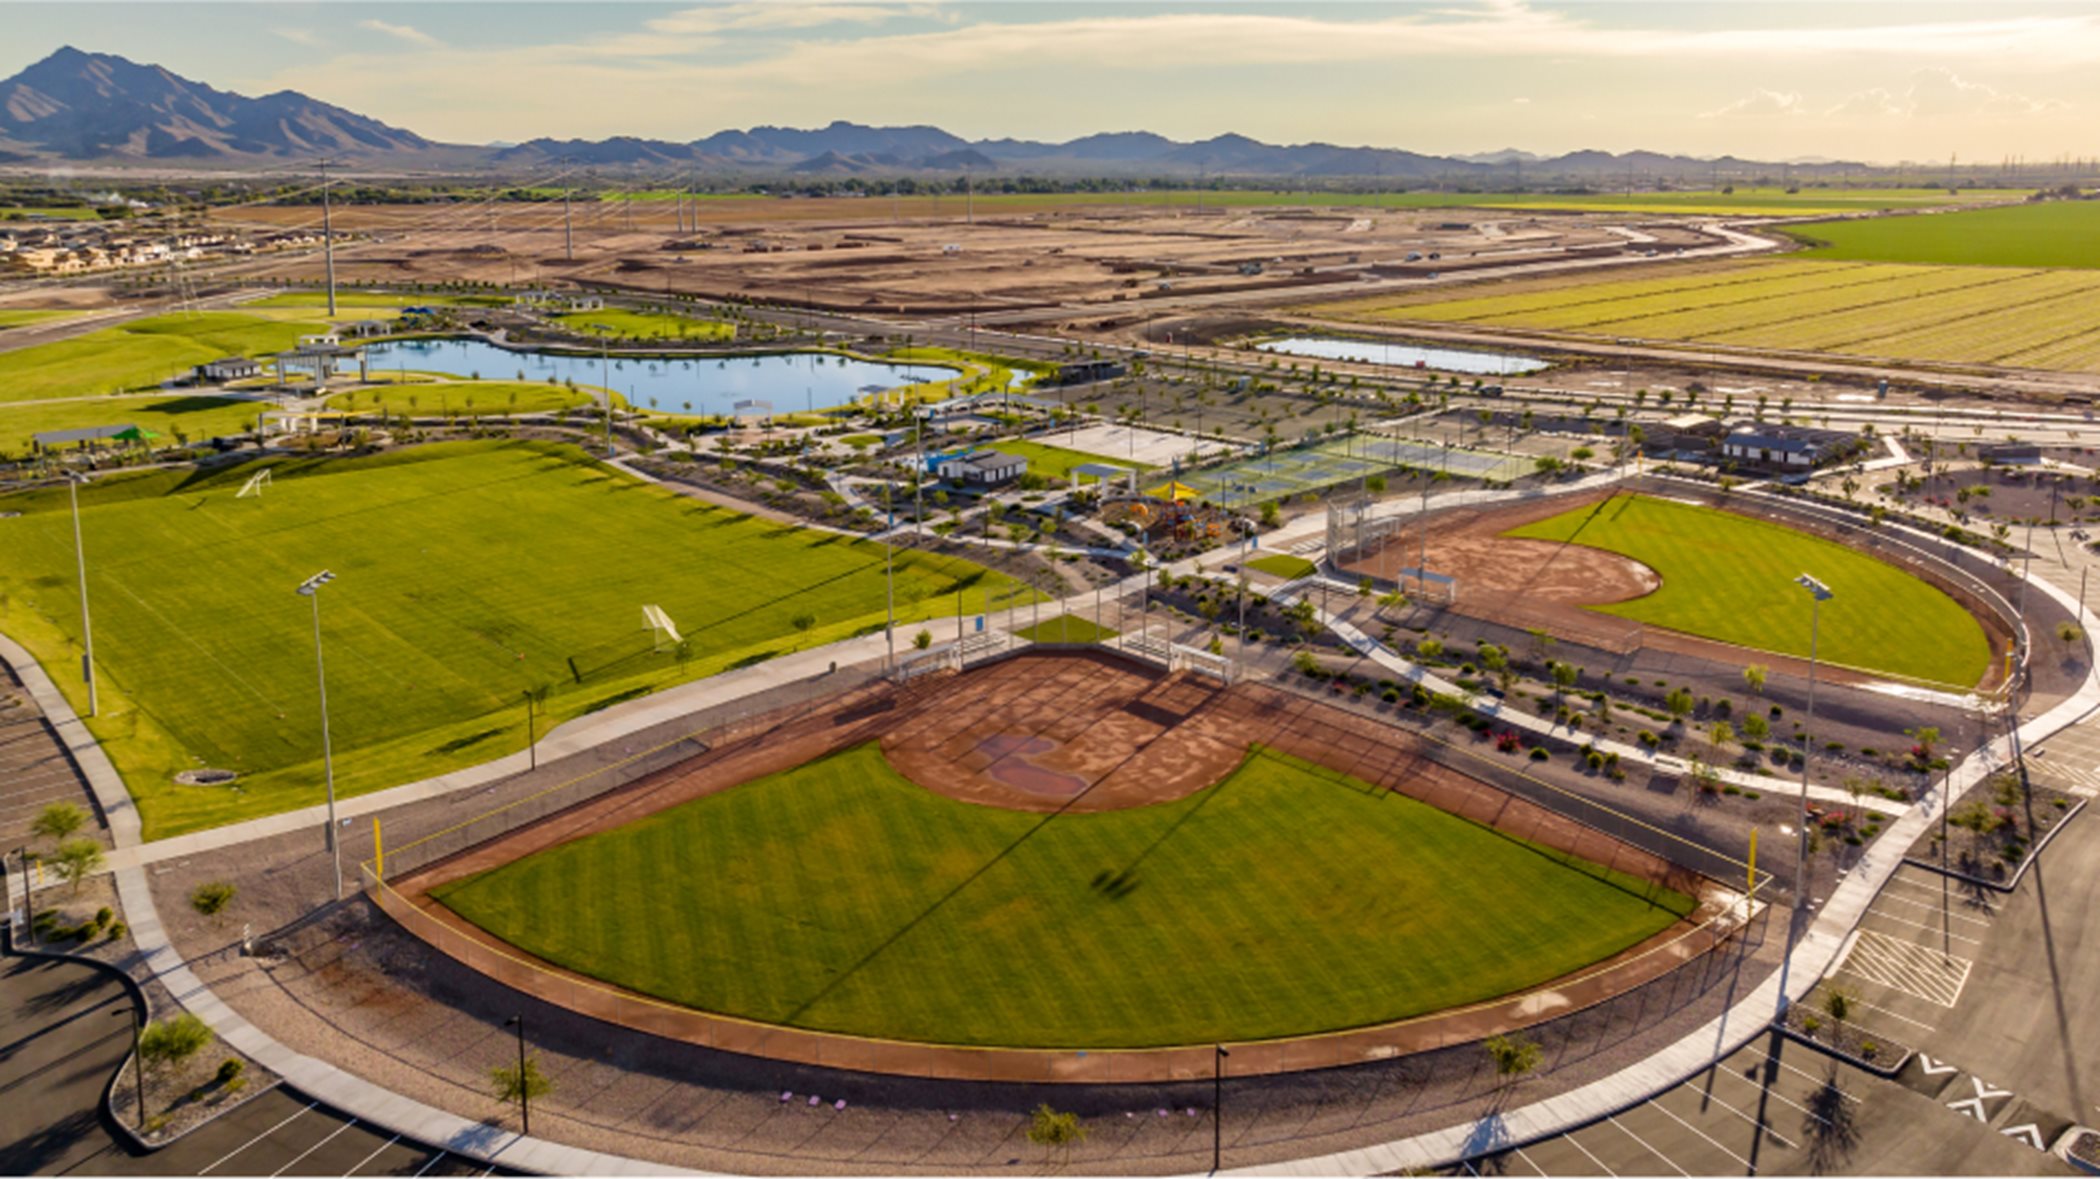 Aerial view of the baseball field